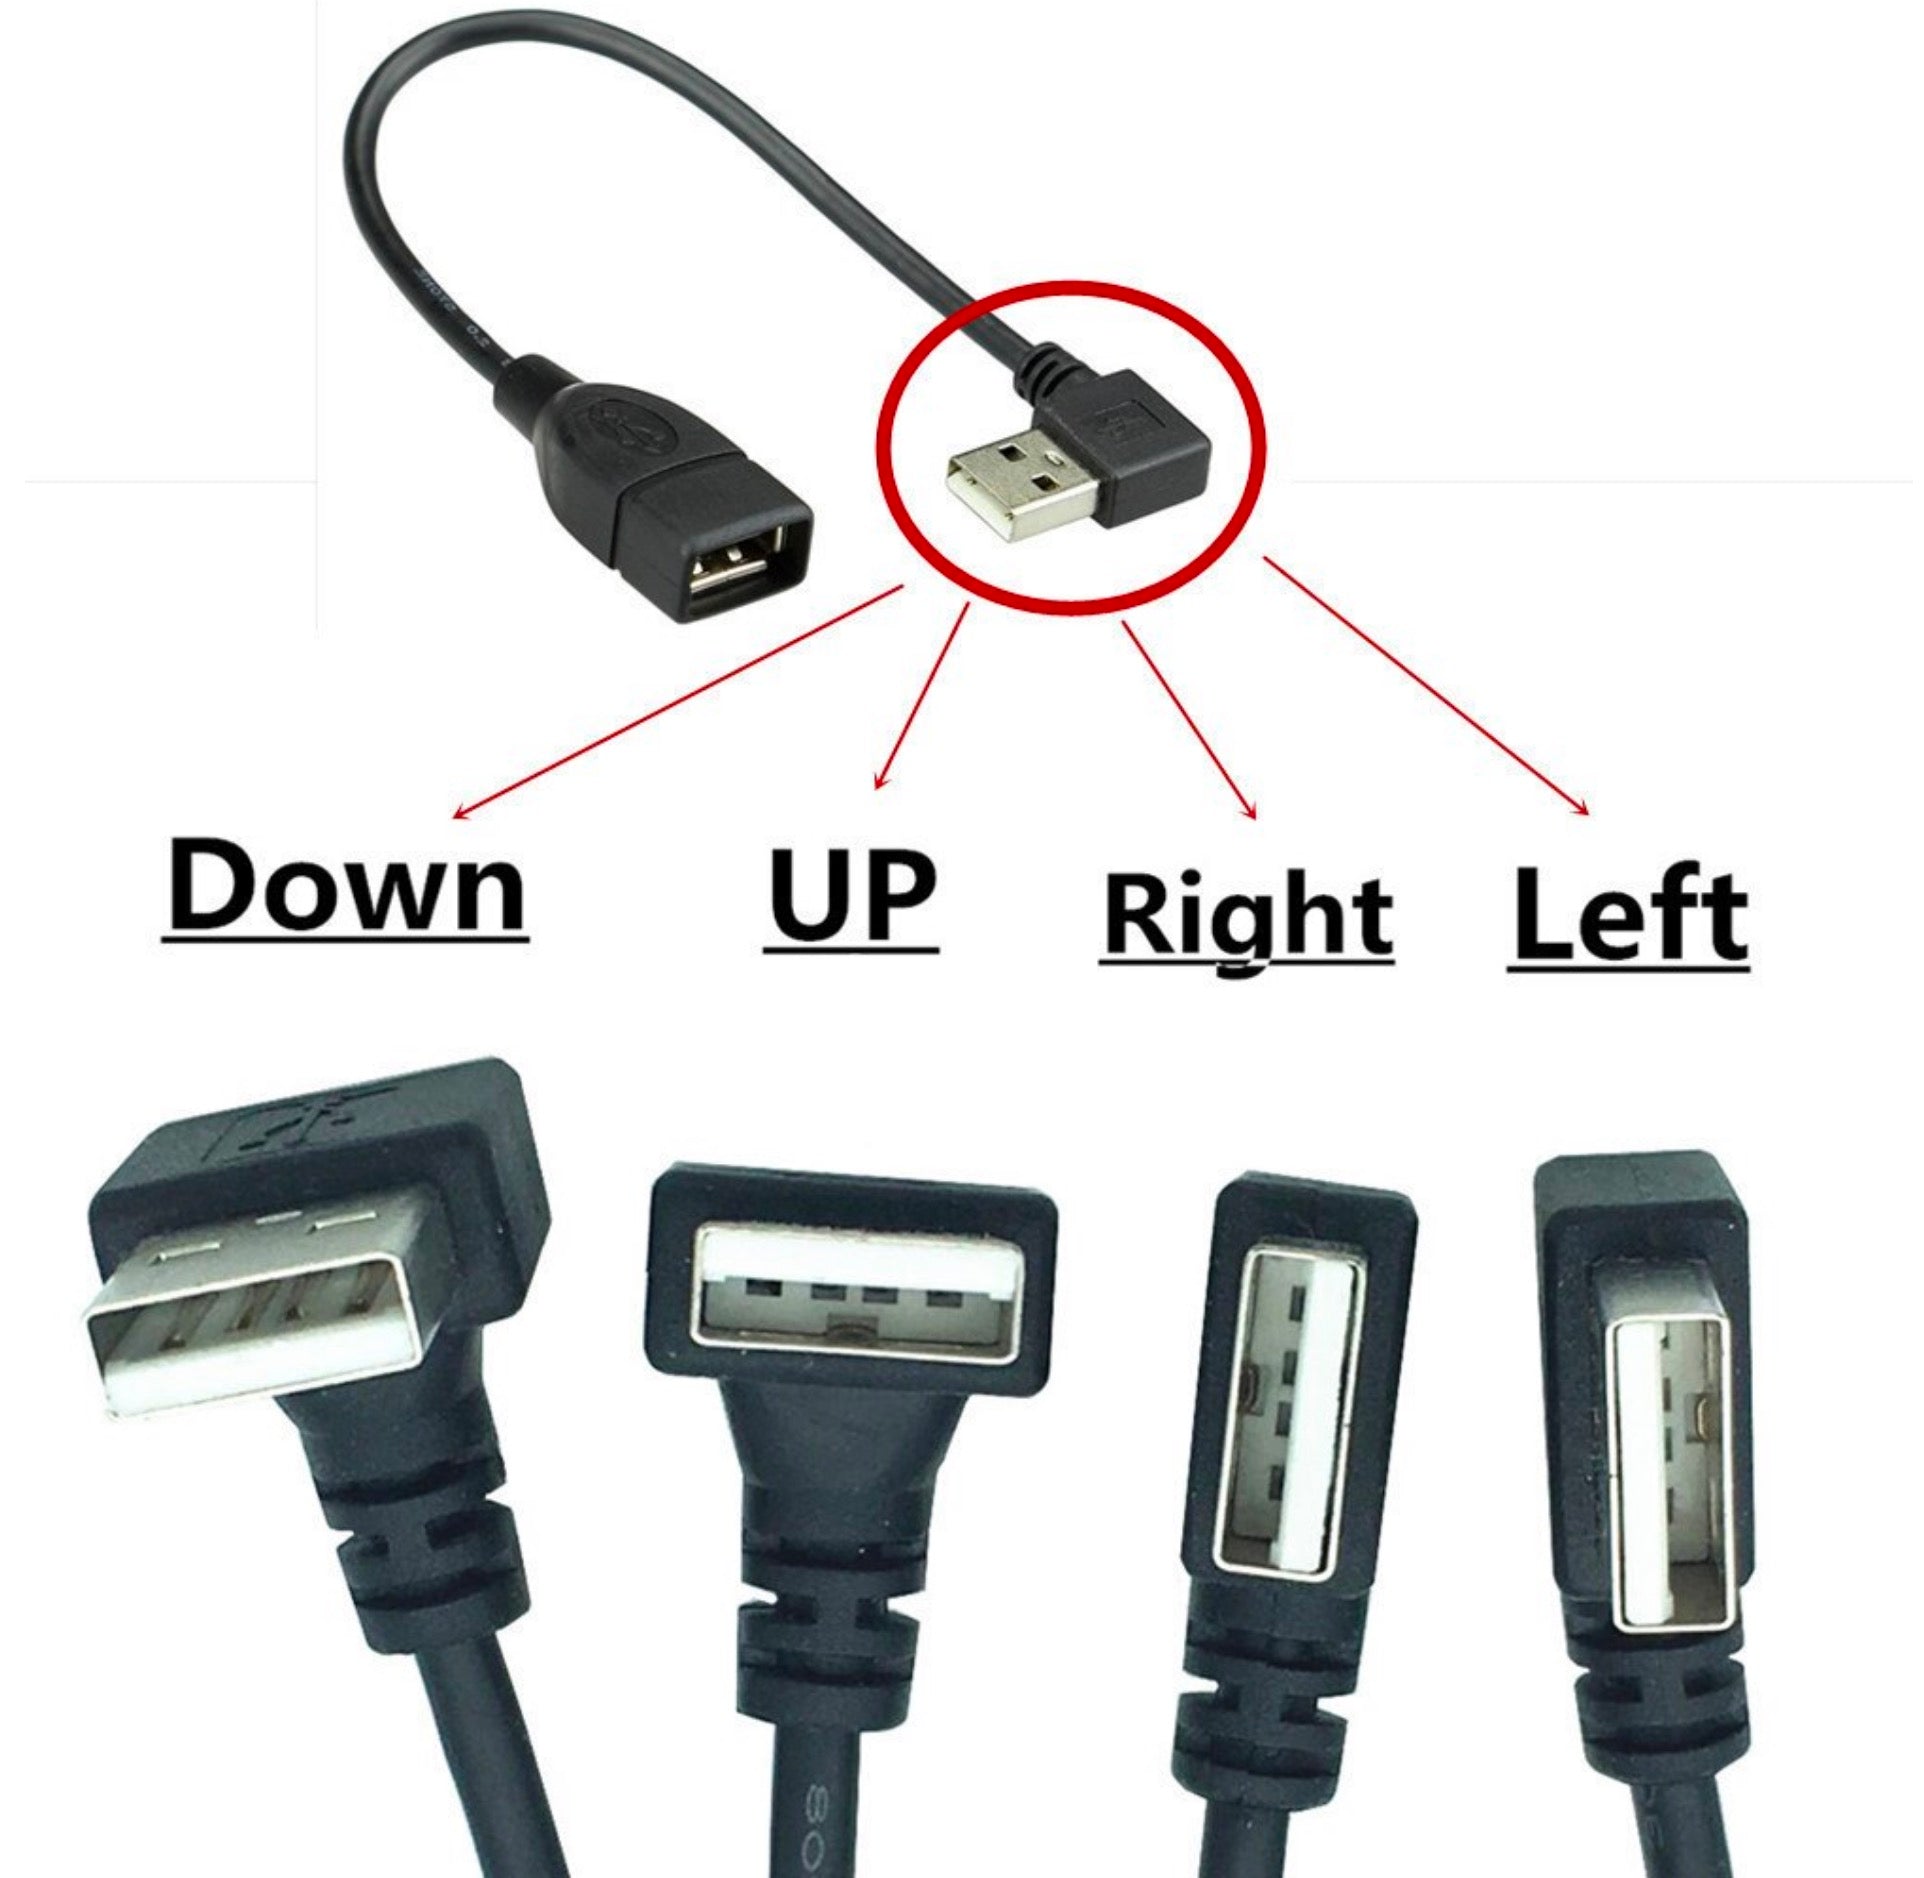 USB 2.0 Type A Male to Female Angled Extension Cable 0.3m